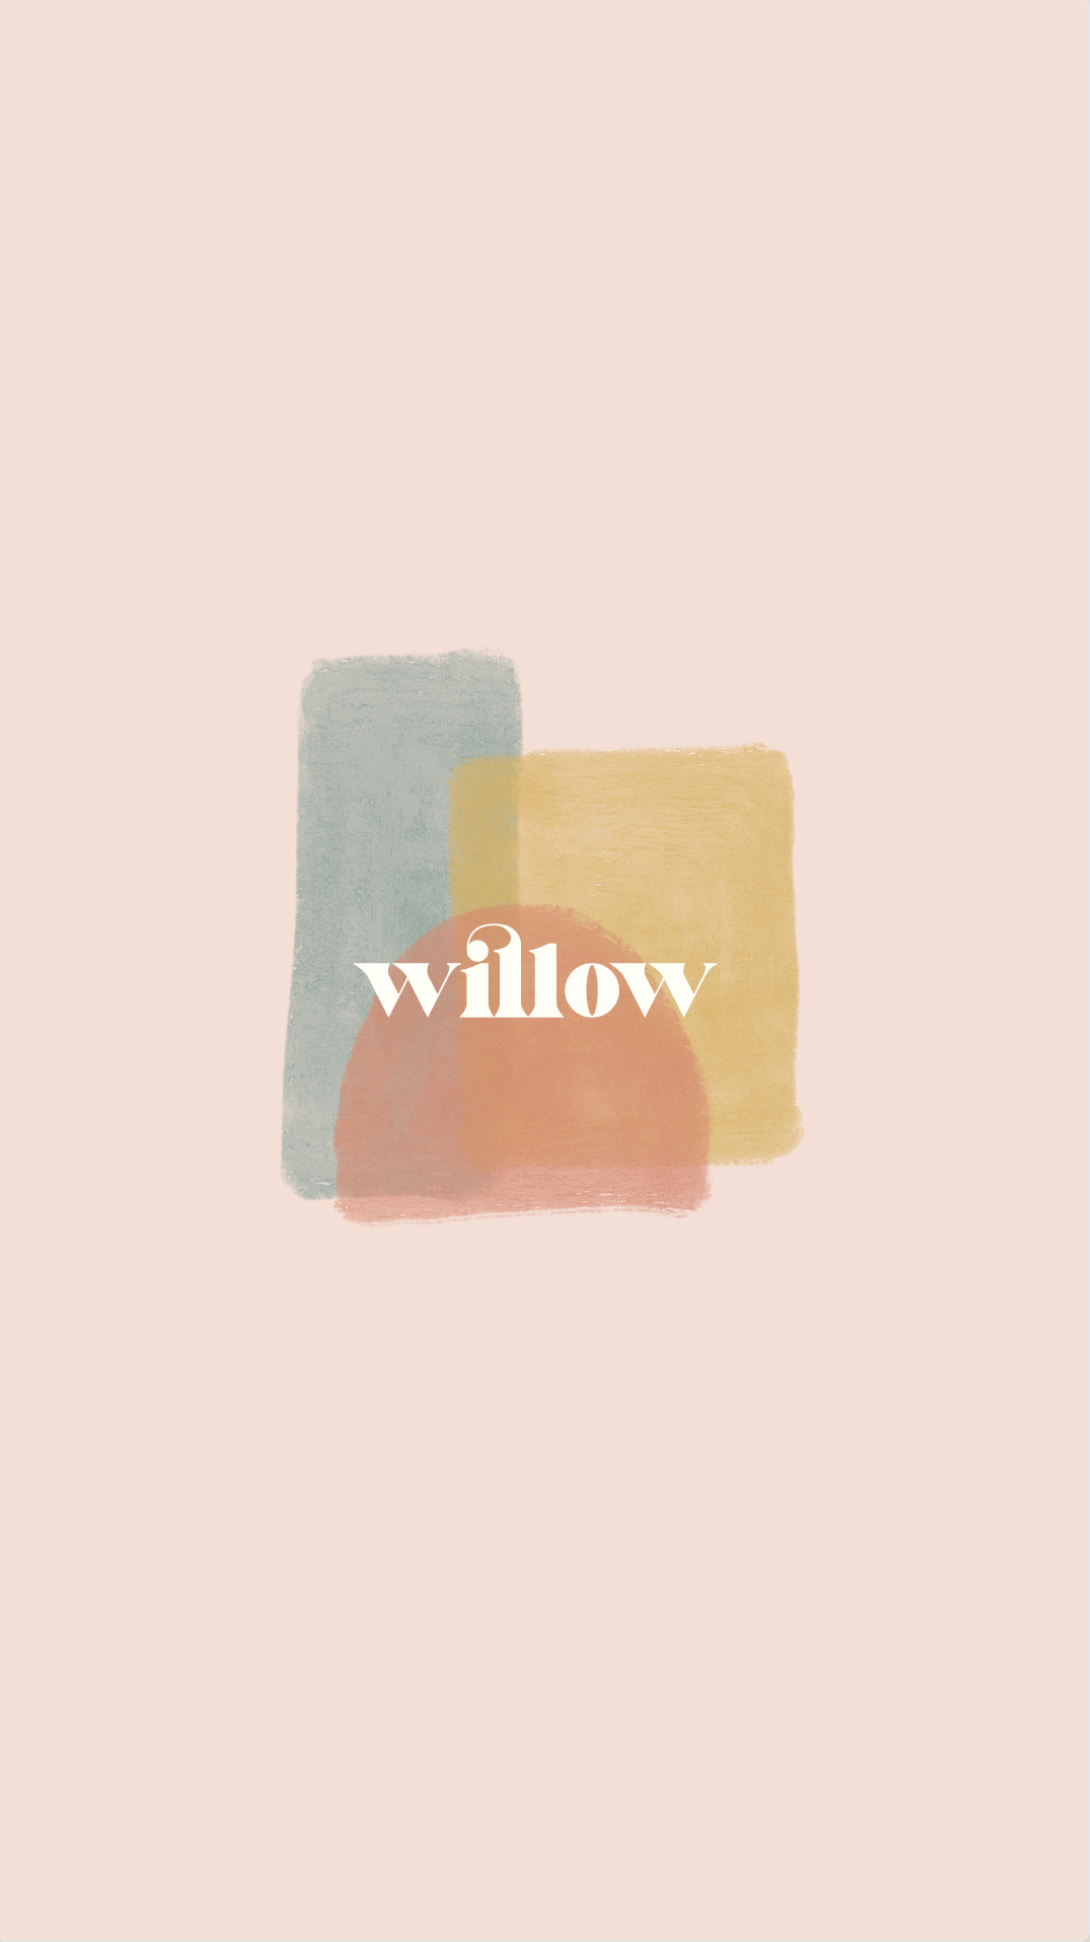 willow-playful-and-colorful-branding.png